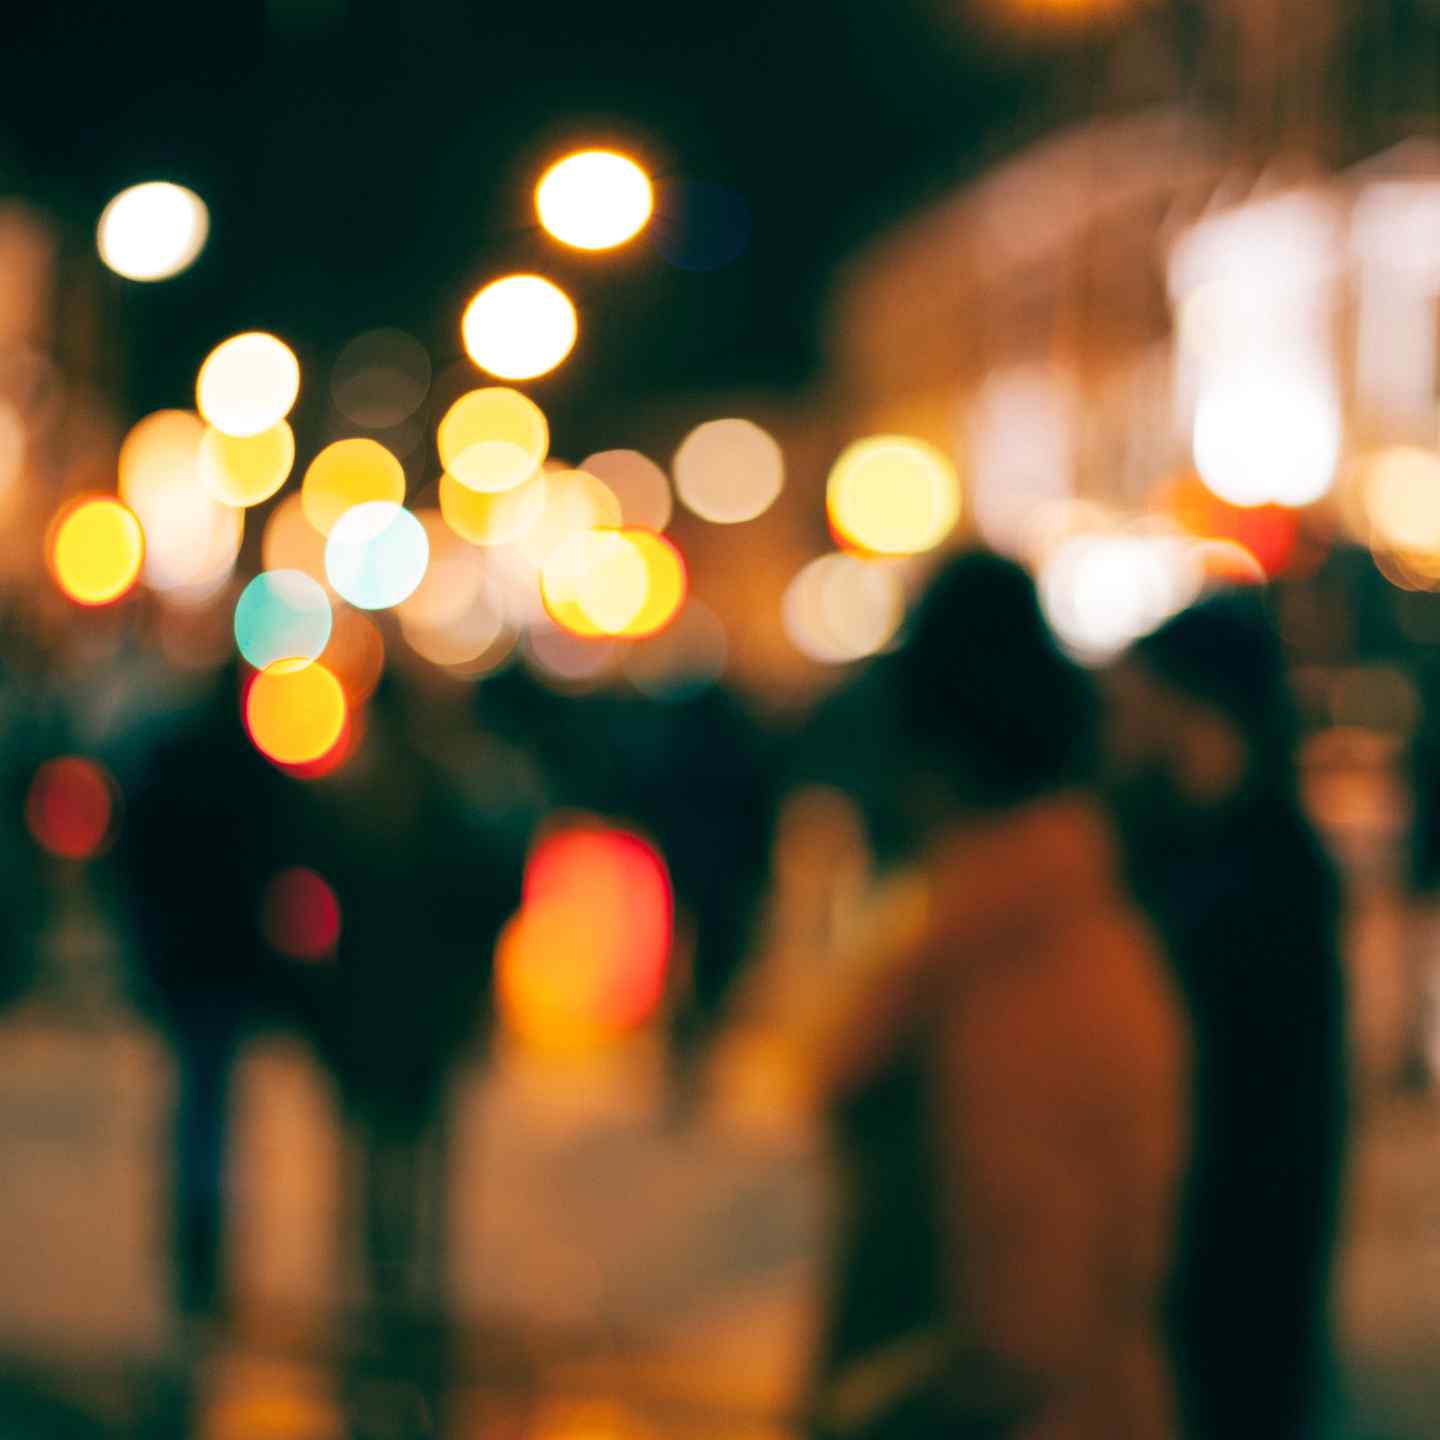 Blurry cityscape of people walking at night with headlights in the background